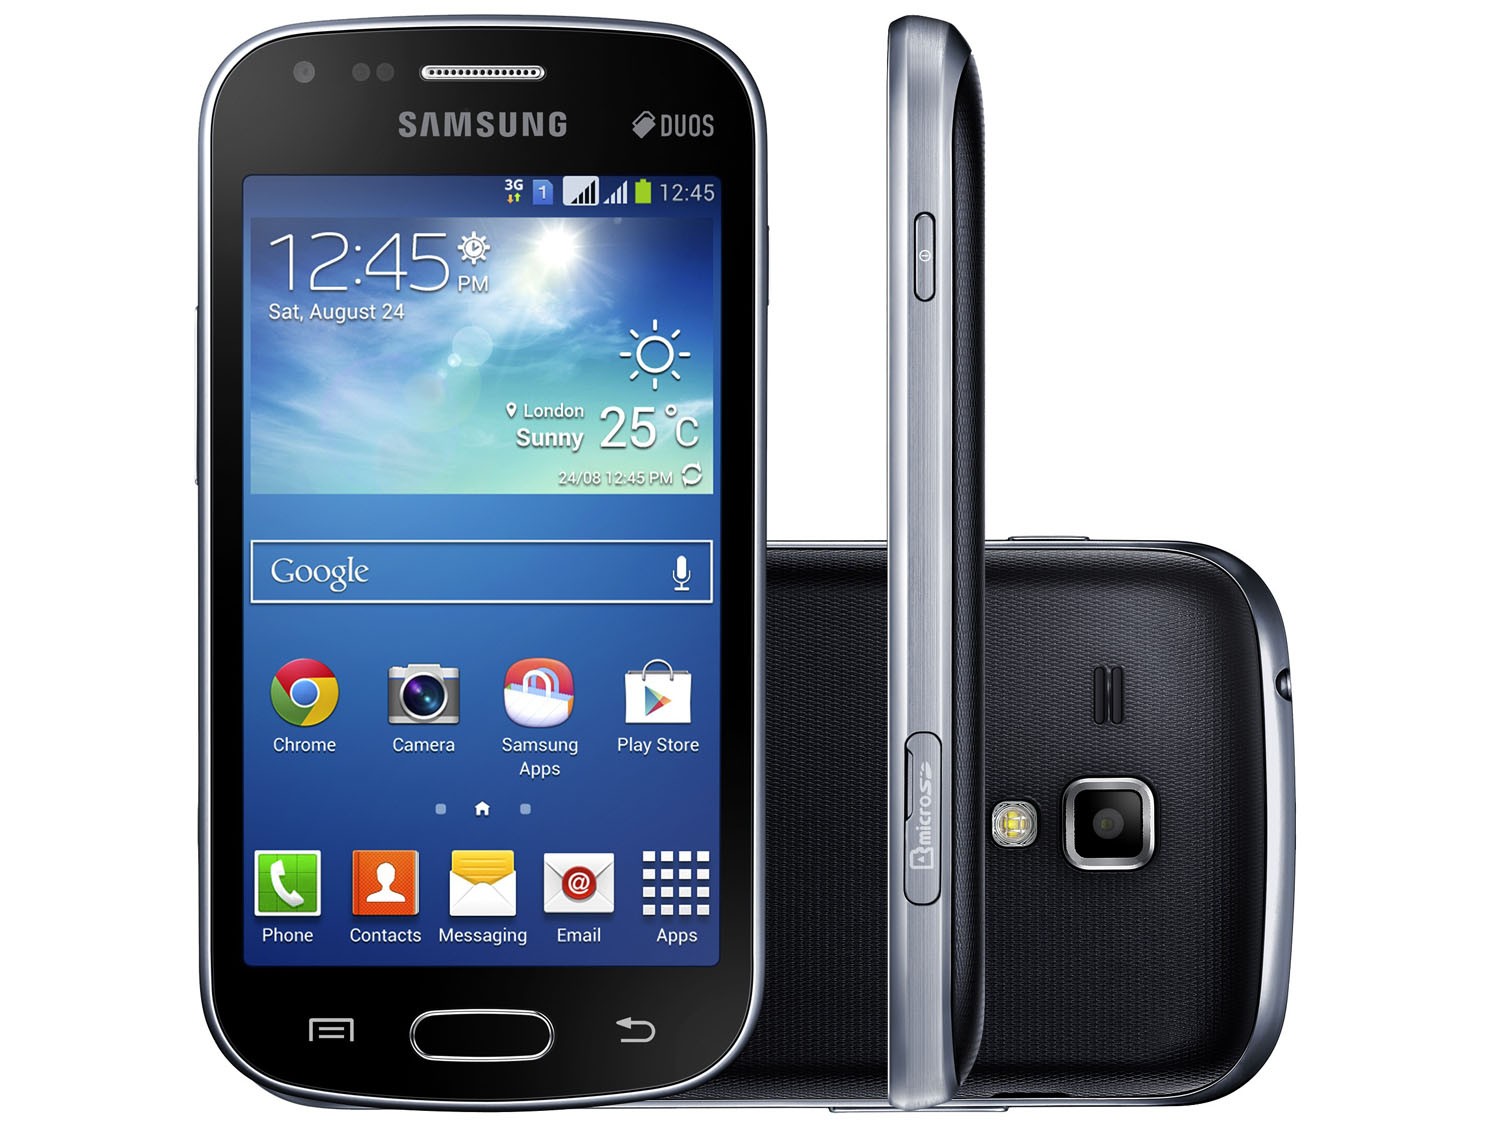 Samsung Galaxy S Duos 2 Price in Pakistan, Specifications, Features